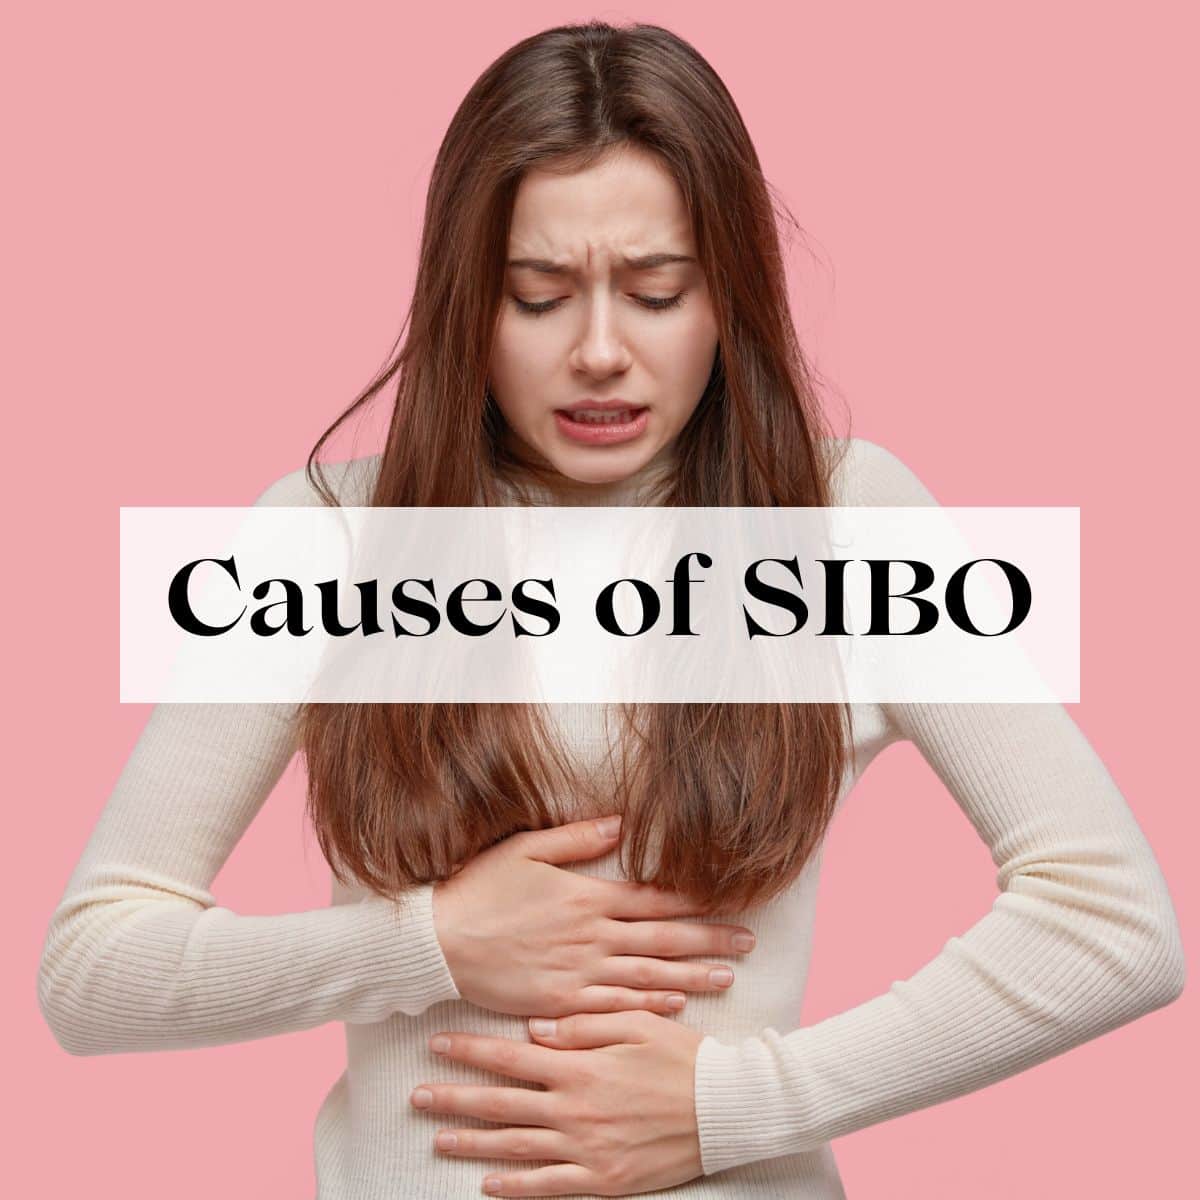 A woman holding her stomach in pain with the title Causes of SIBO over her.